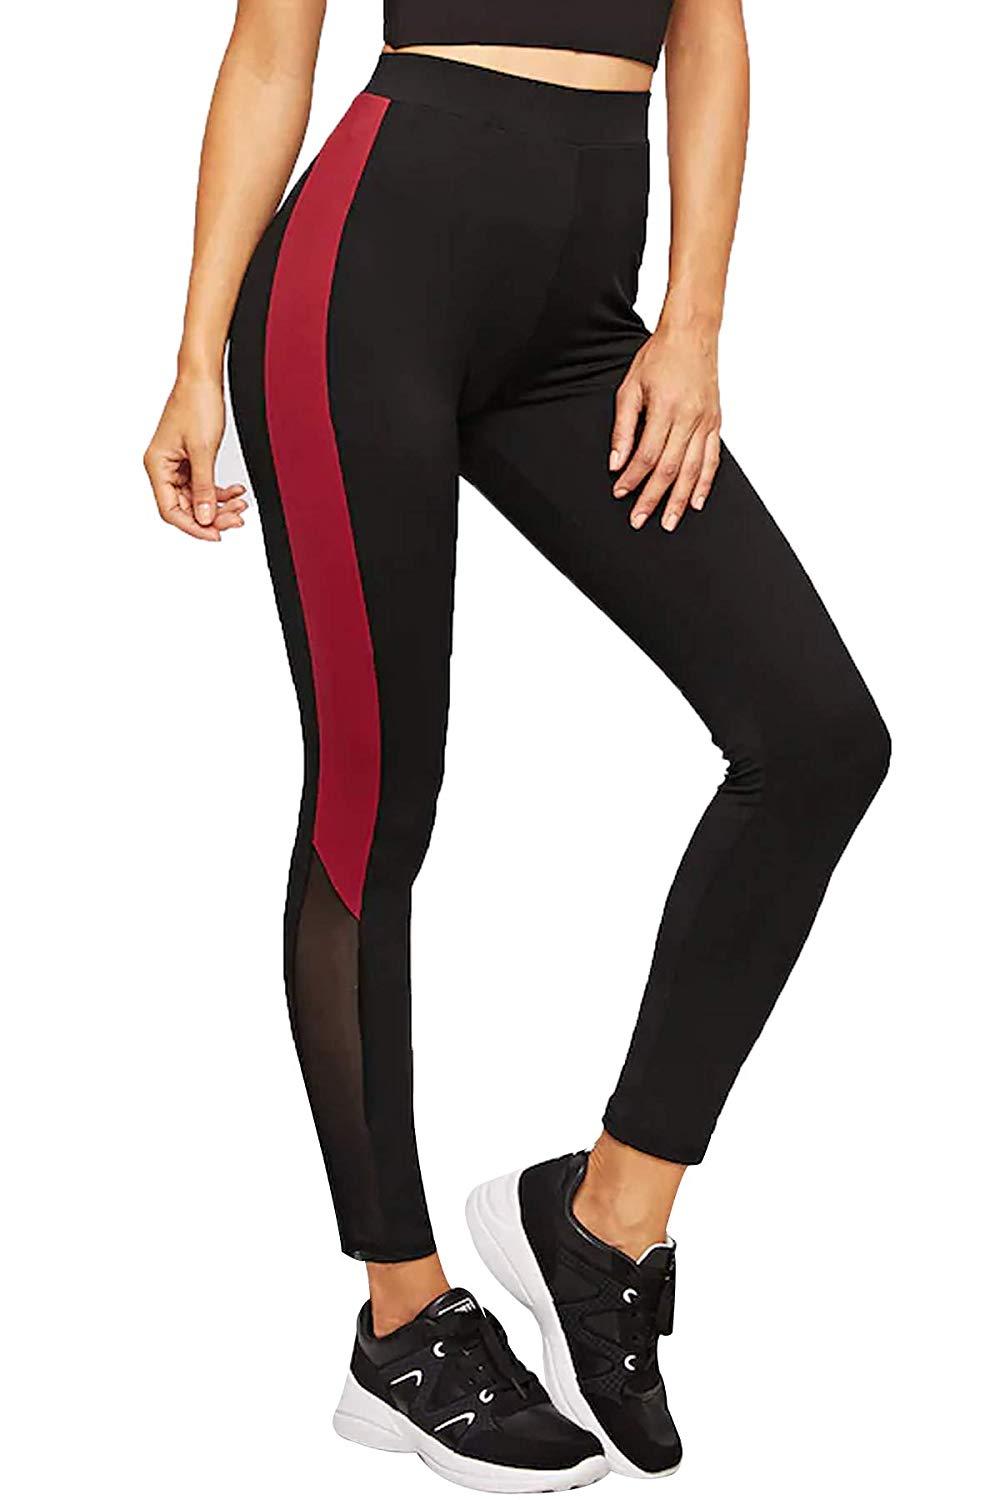 KGN HUB Yoga Gym Regular Fit Ankle Length Track Pants Jeggings |  Stretchable Striped Sports Track Pant | Sports Tights |For Women's &Girl's  (Black)